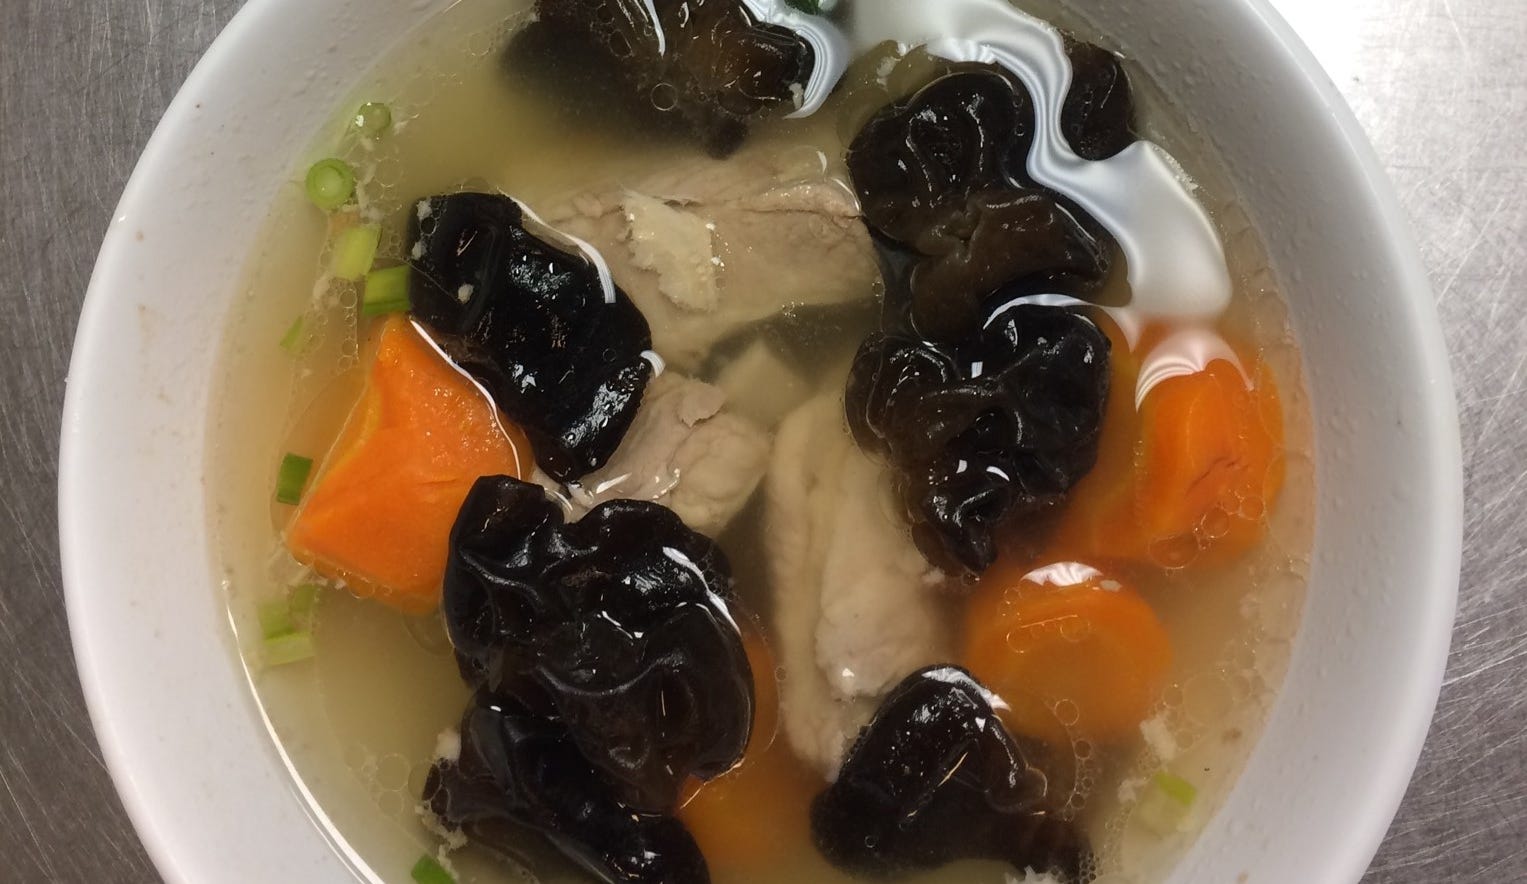 Wood ear mushrooms, carrot and pork ribs in broth is one of the traditional dishes served at Jing's, 207 E. Buffalo St., on the first floor of the Marshall Building.